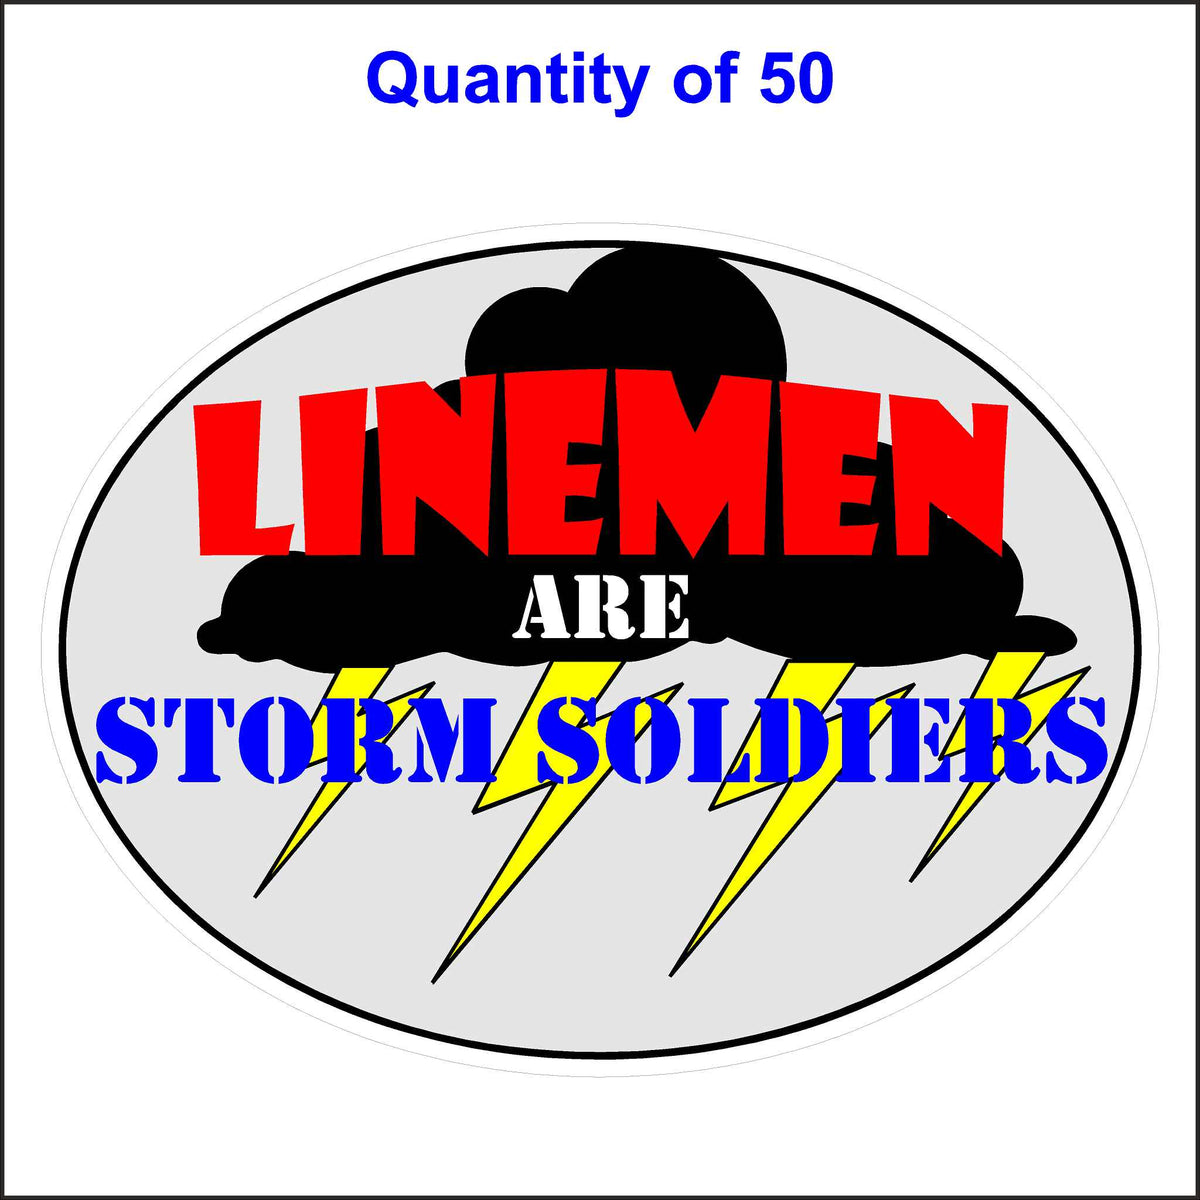 Gray Lineman Are Storm Soldiers Stickers. 50 Quantity.